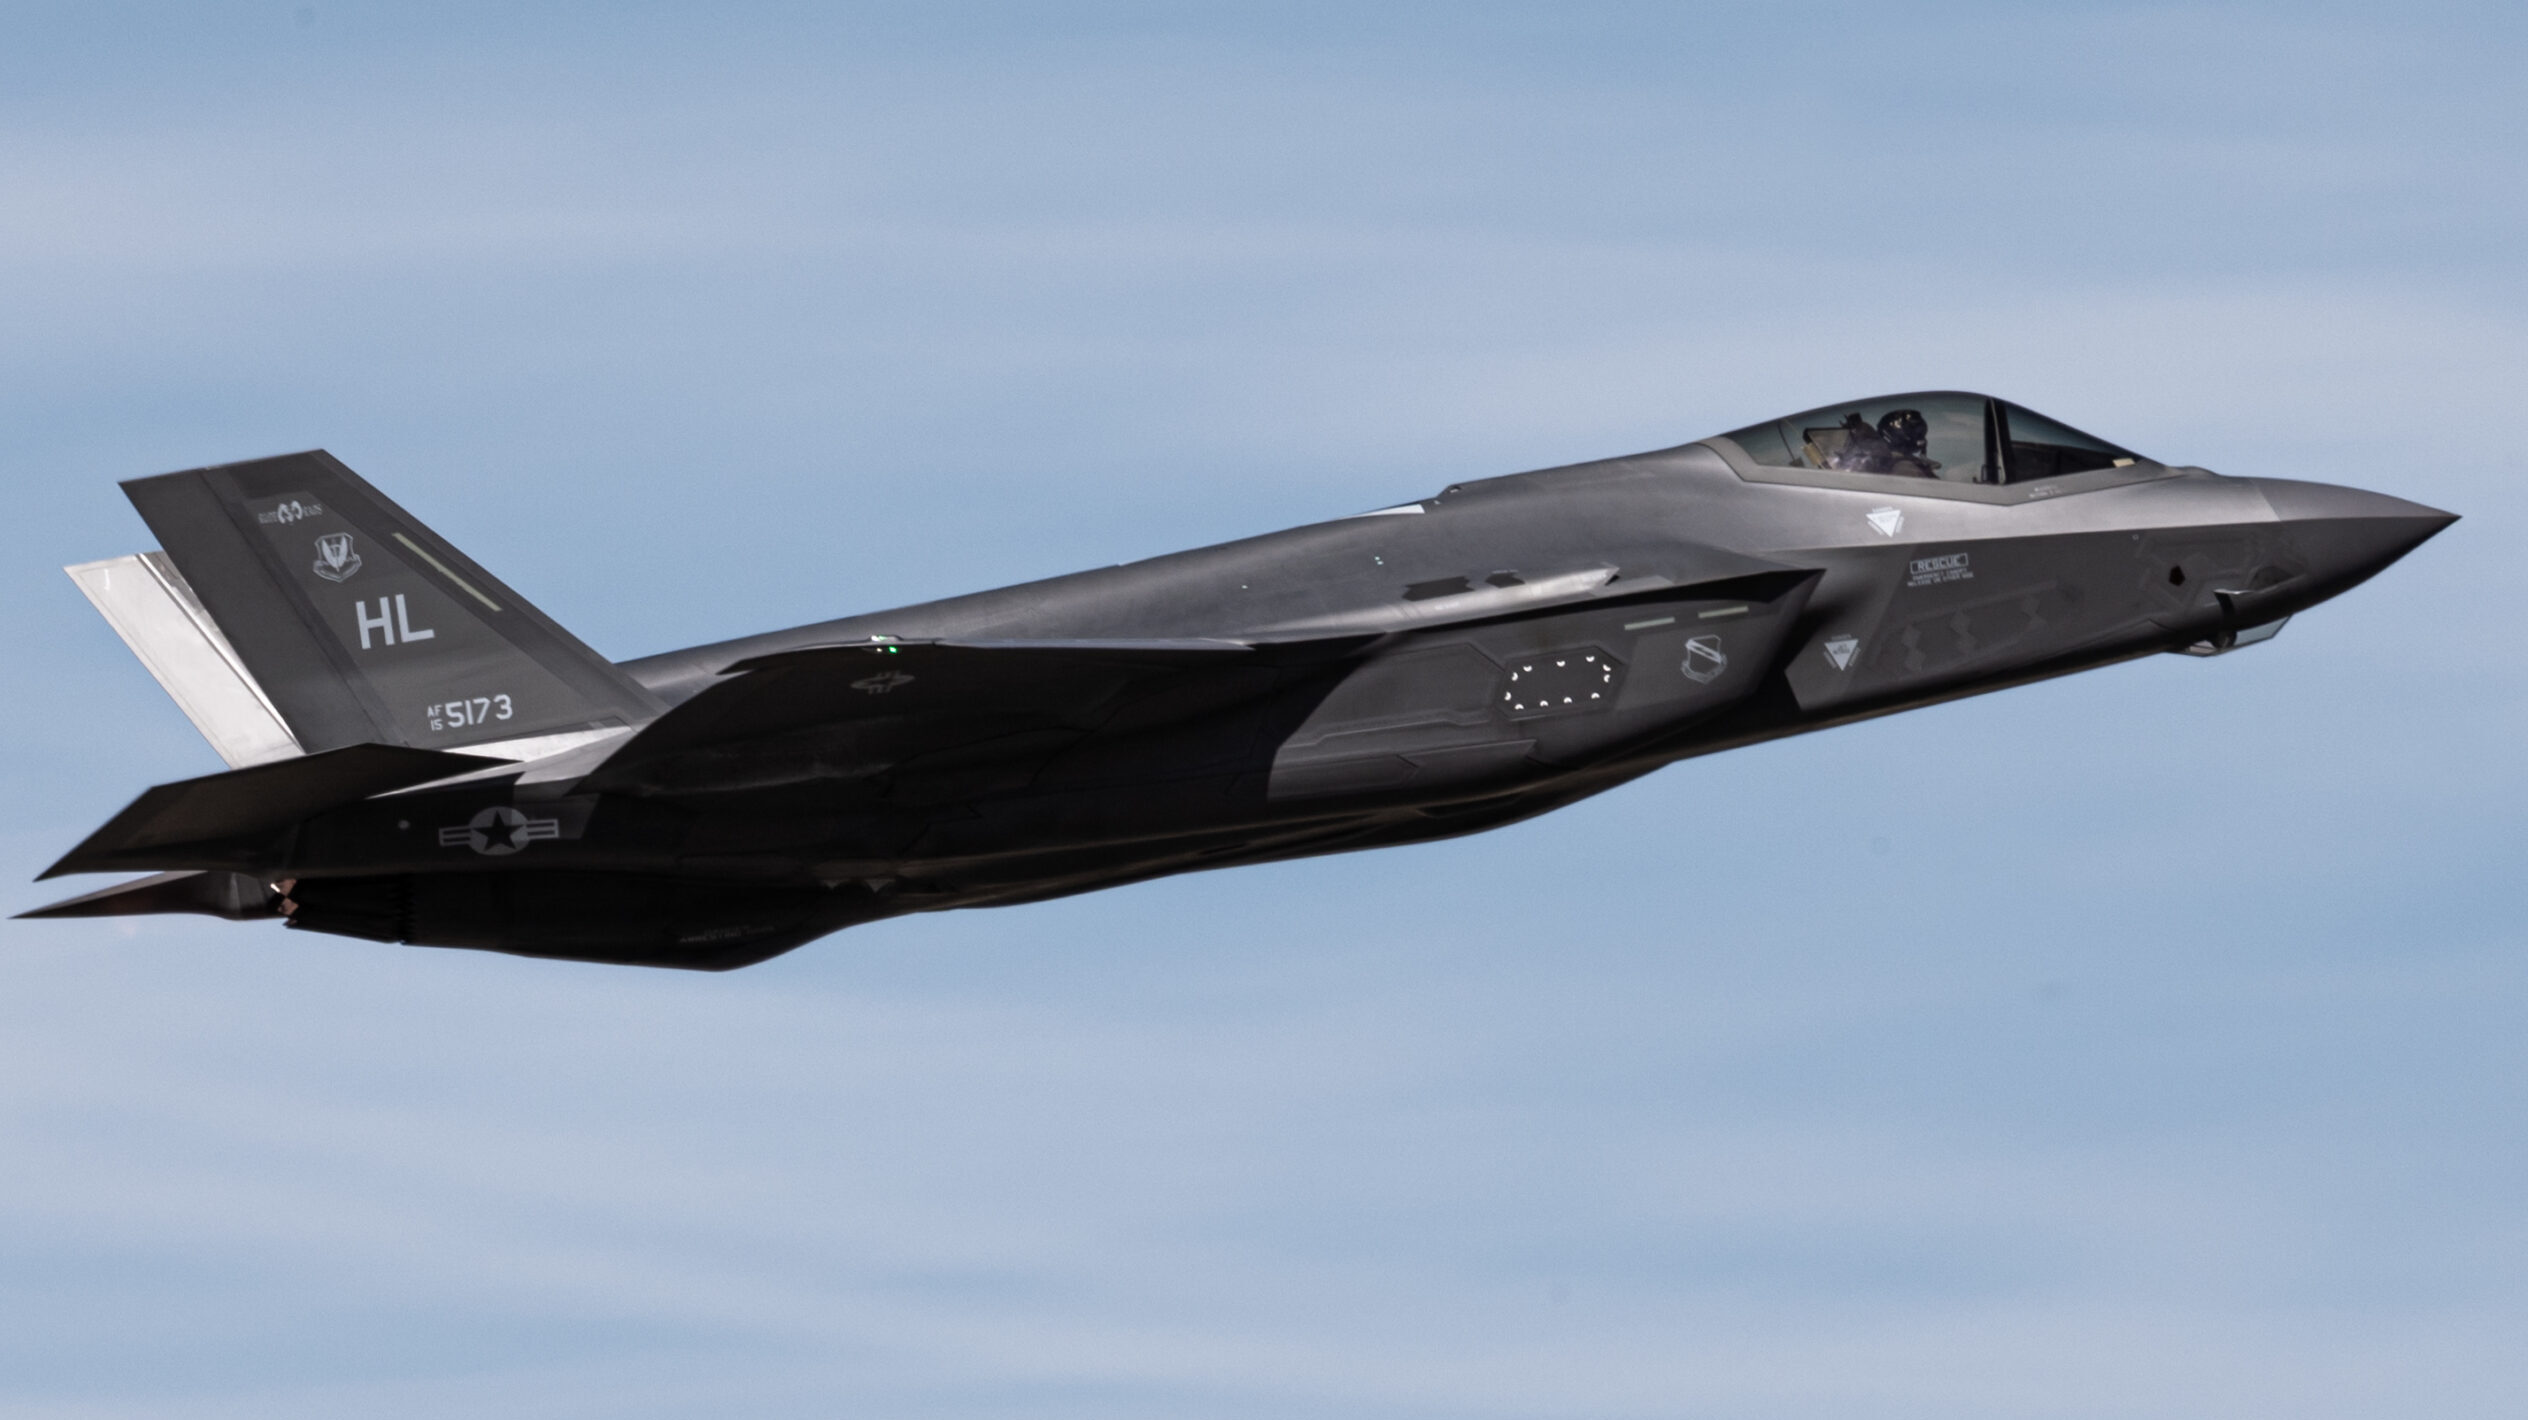 Pentagon still withholding F-35 payments to Lockheed over upgrade delays